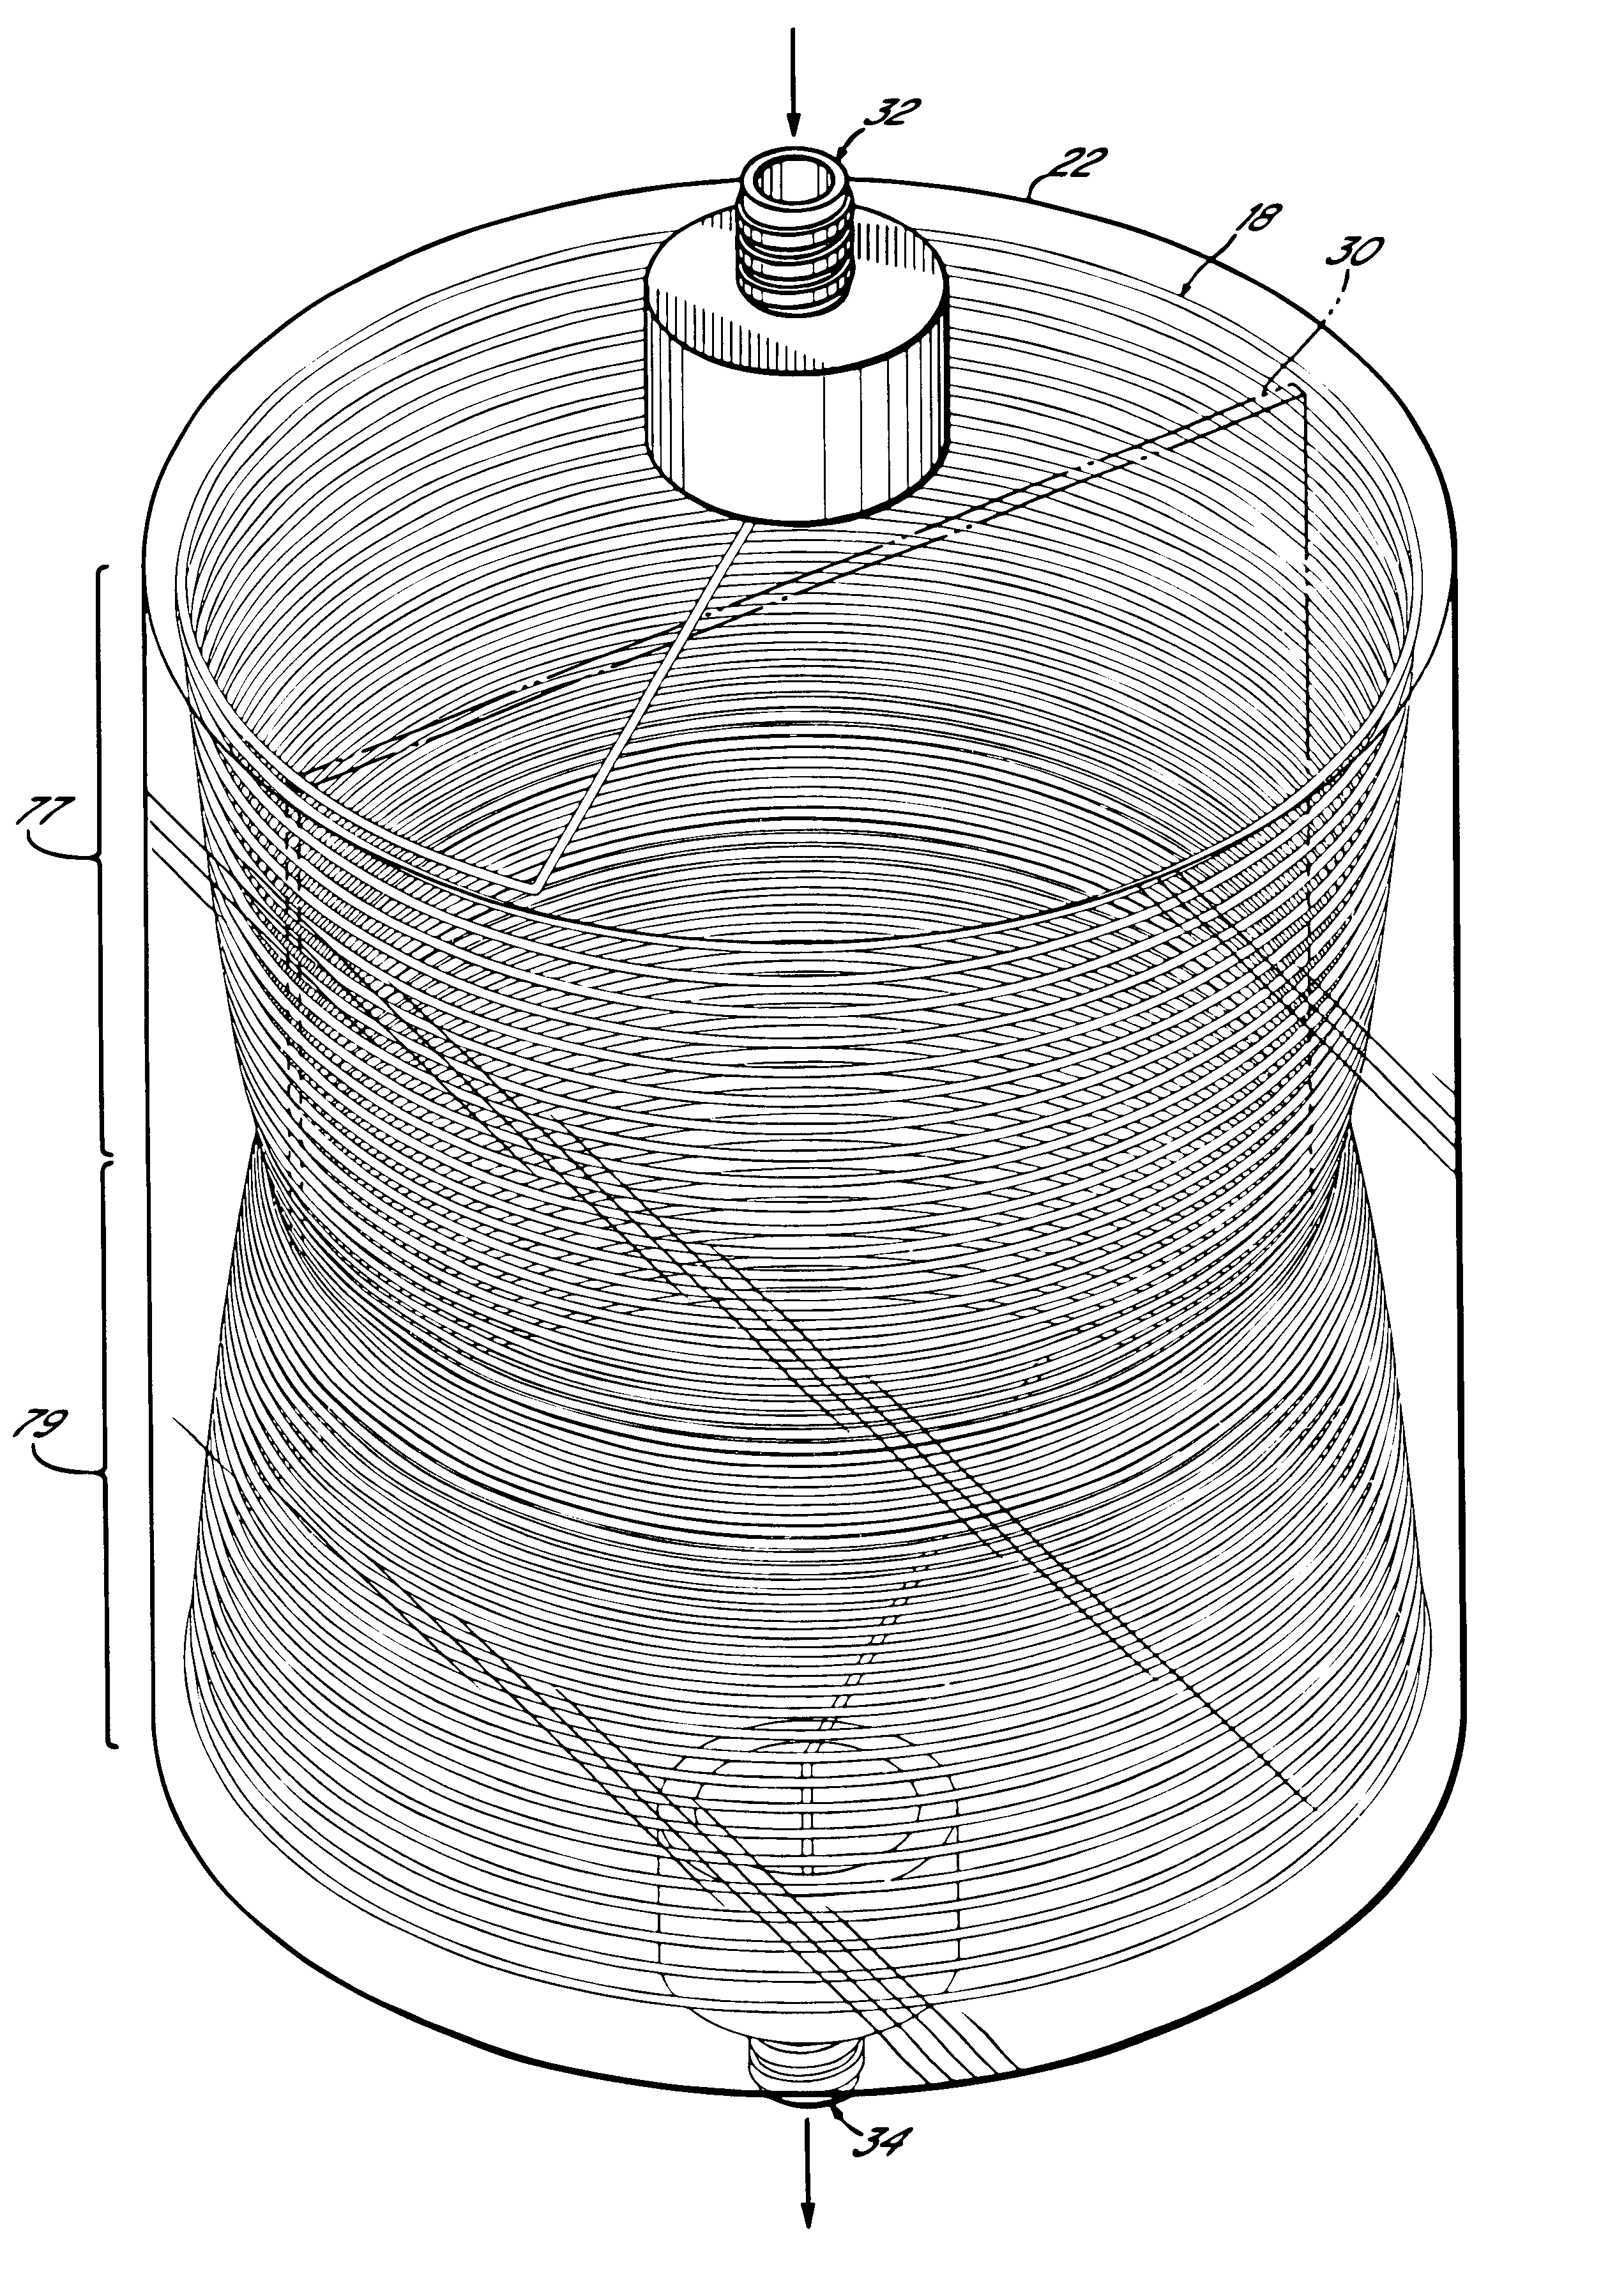 Suspension device and method